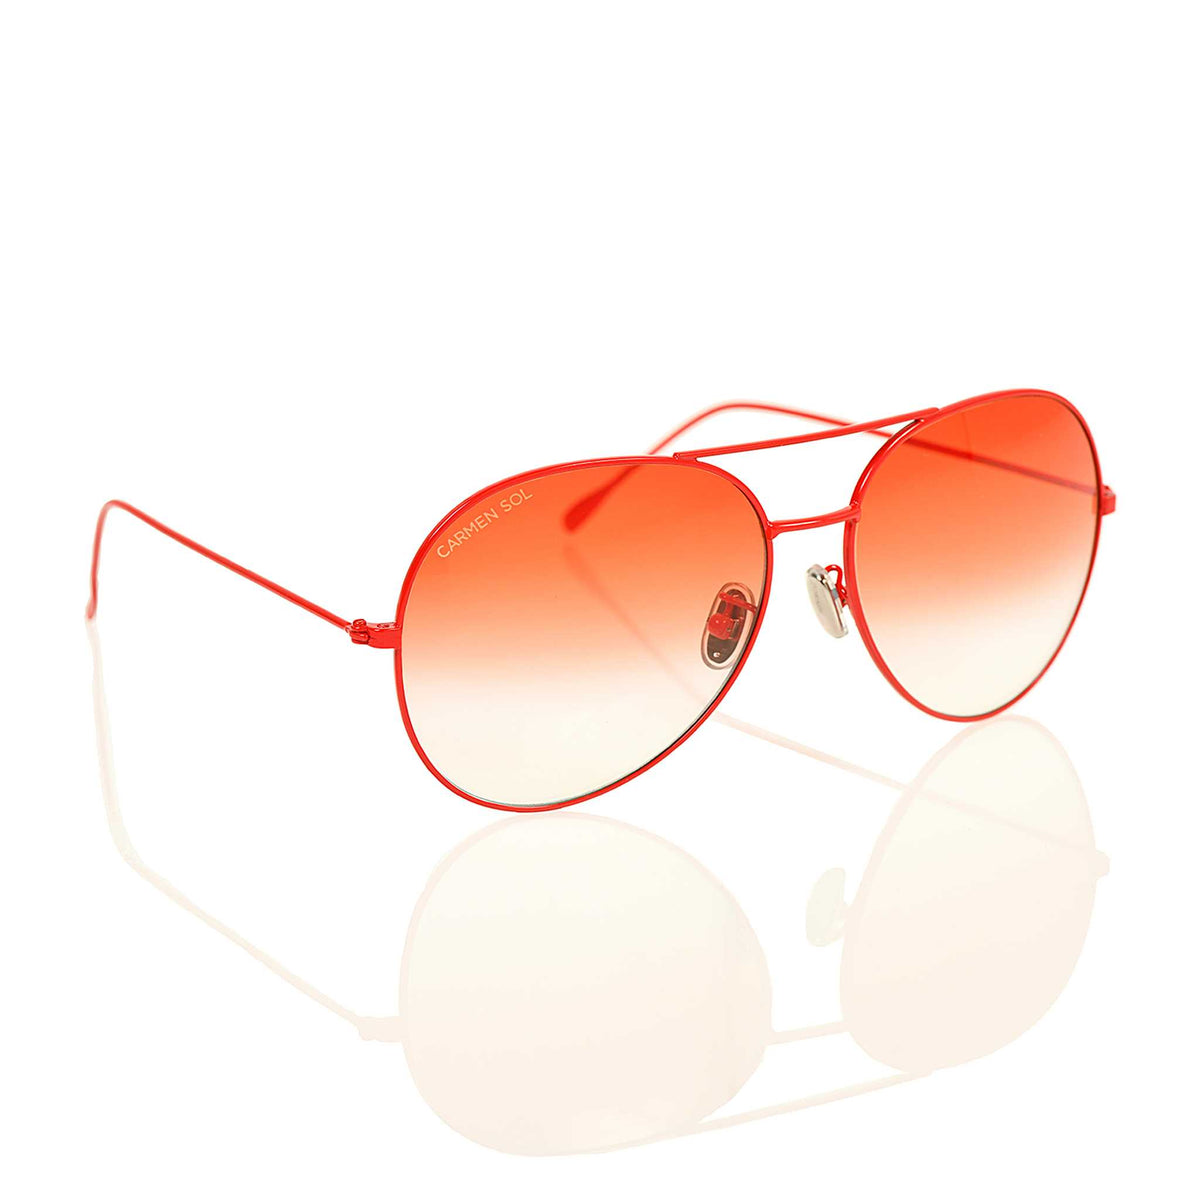 Best red sunglasses in the market